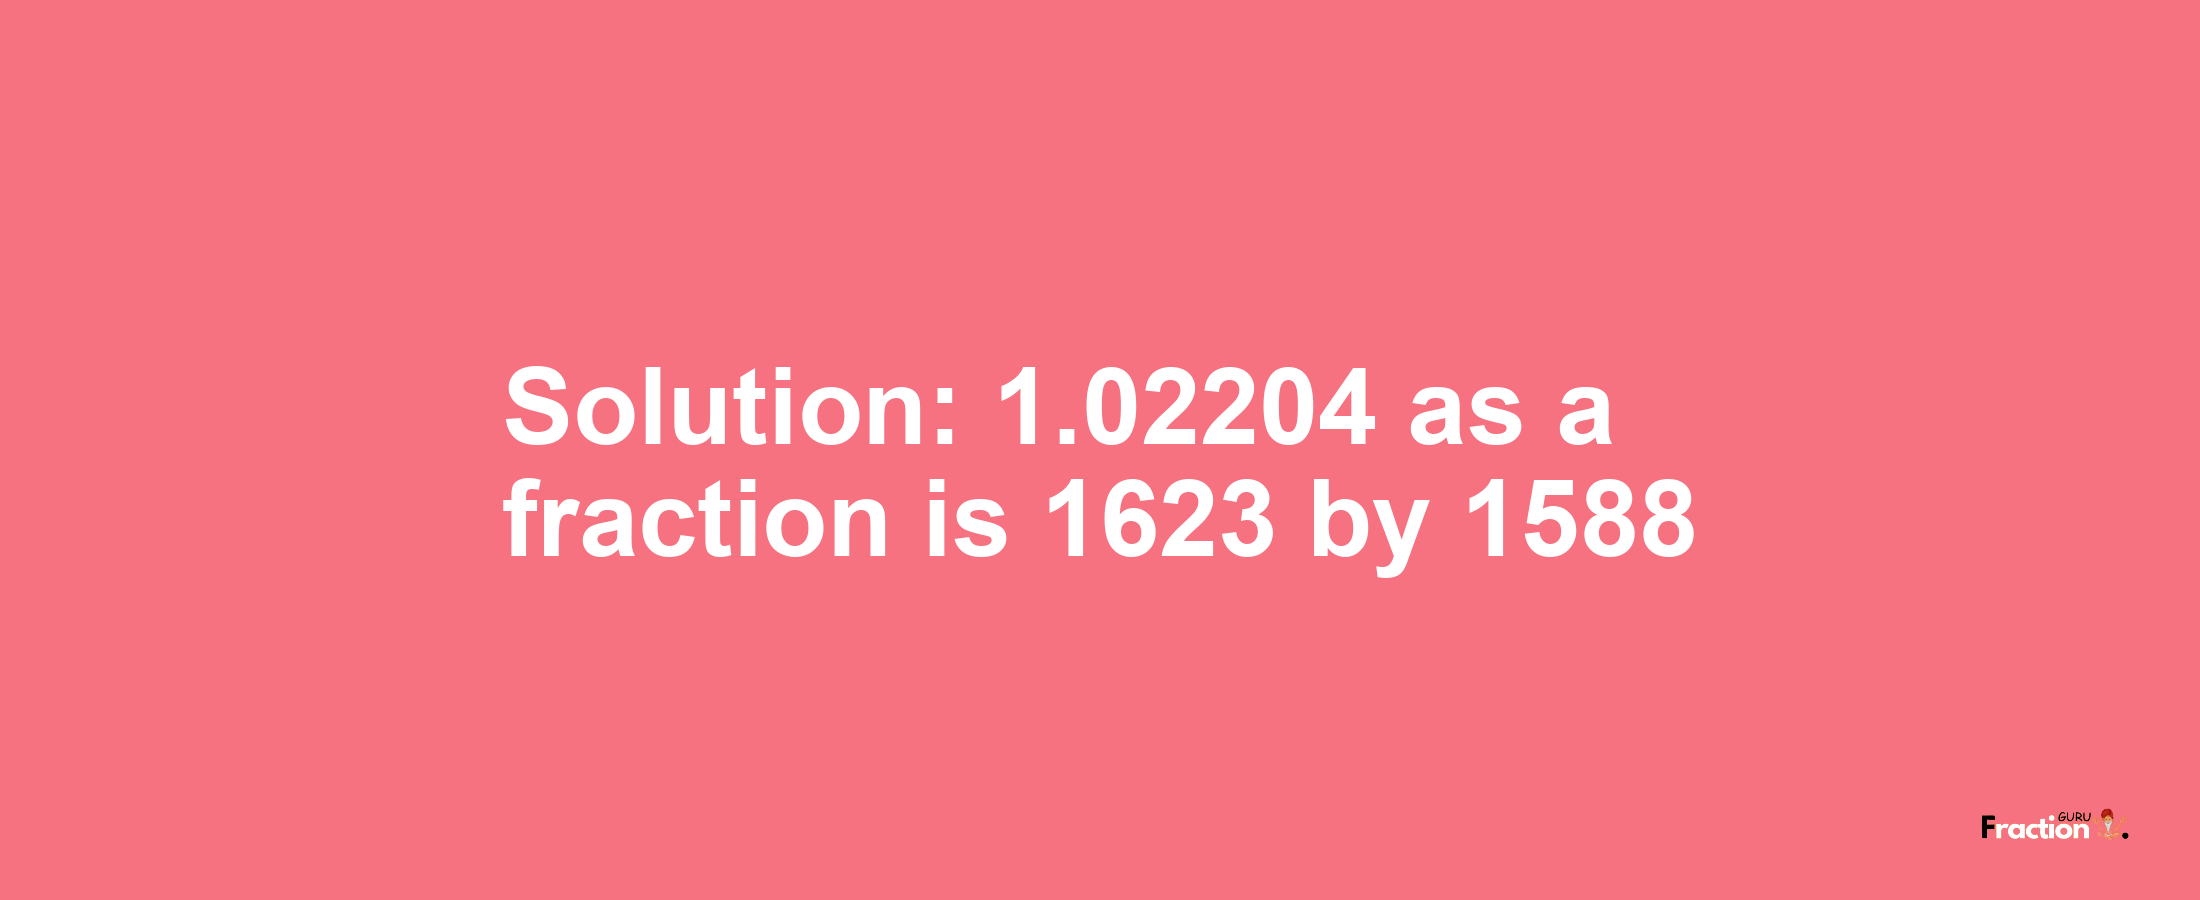 Solution:1.02204 as a fraction is 1623/1588